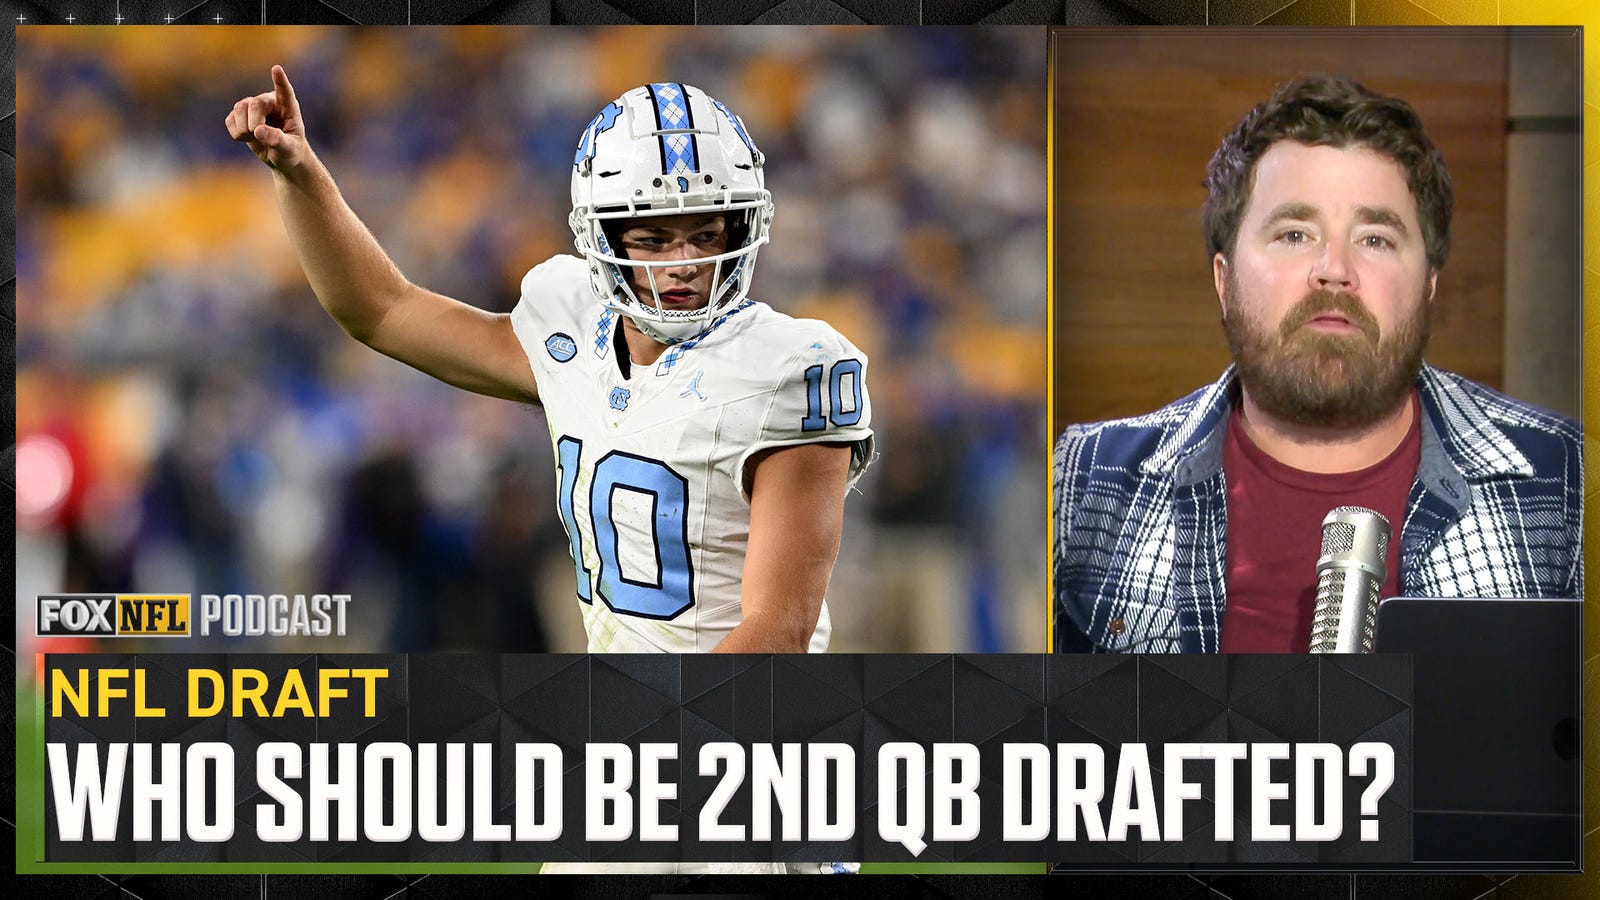 Who should be the QB drafted after Caleb Williams?